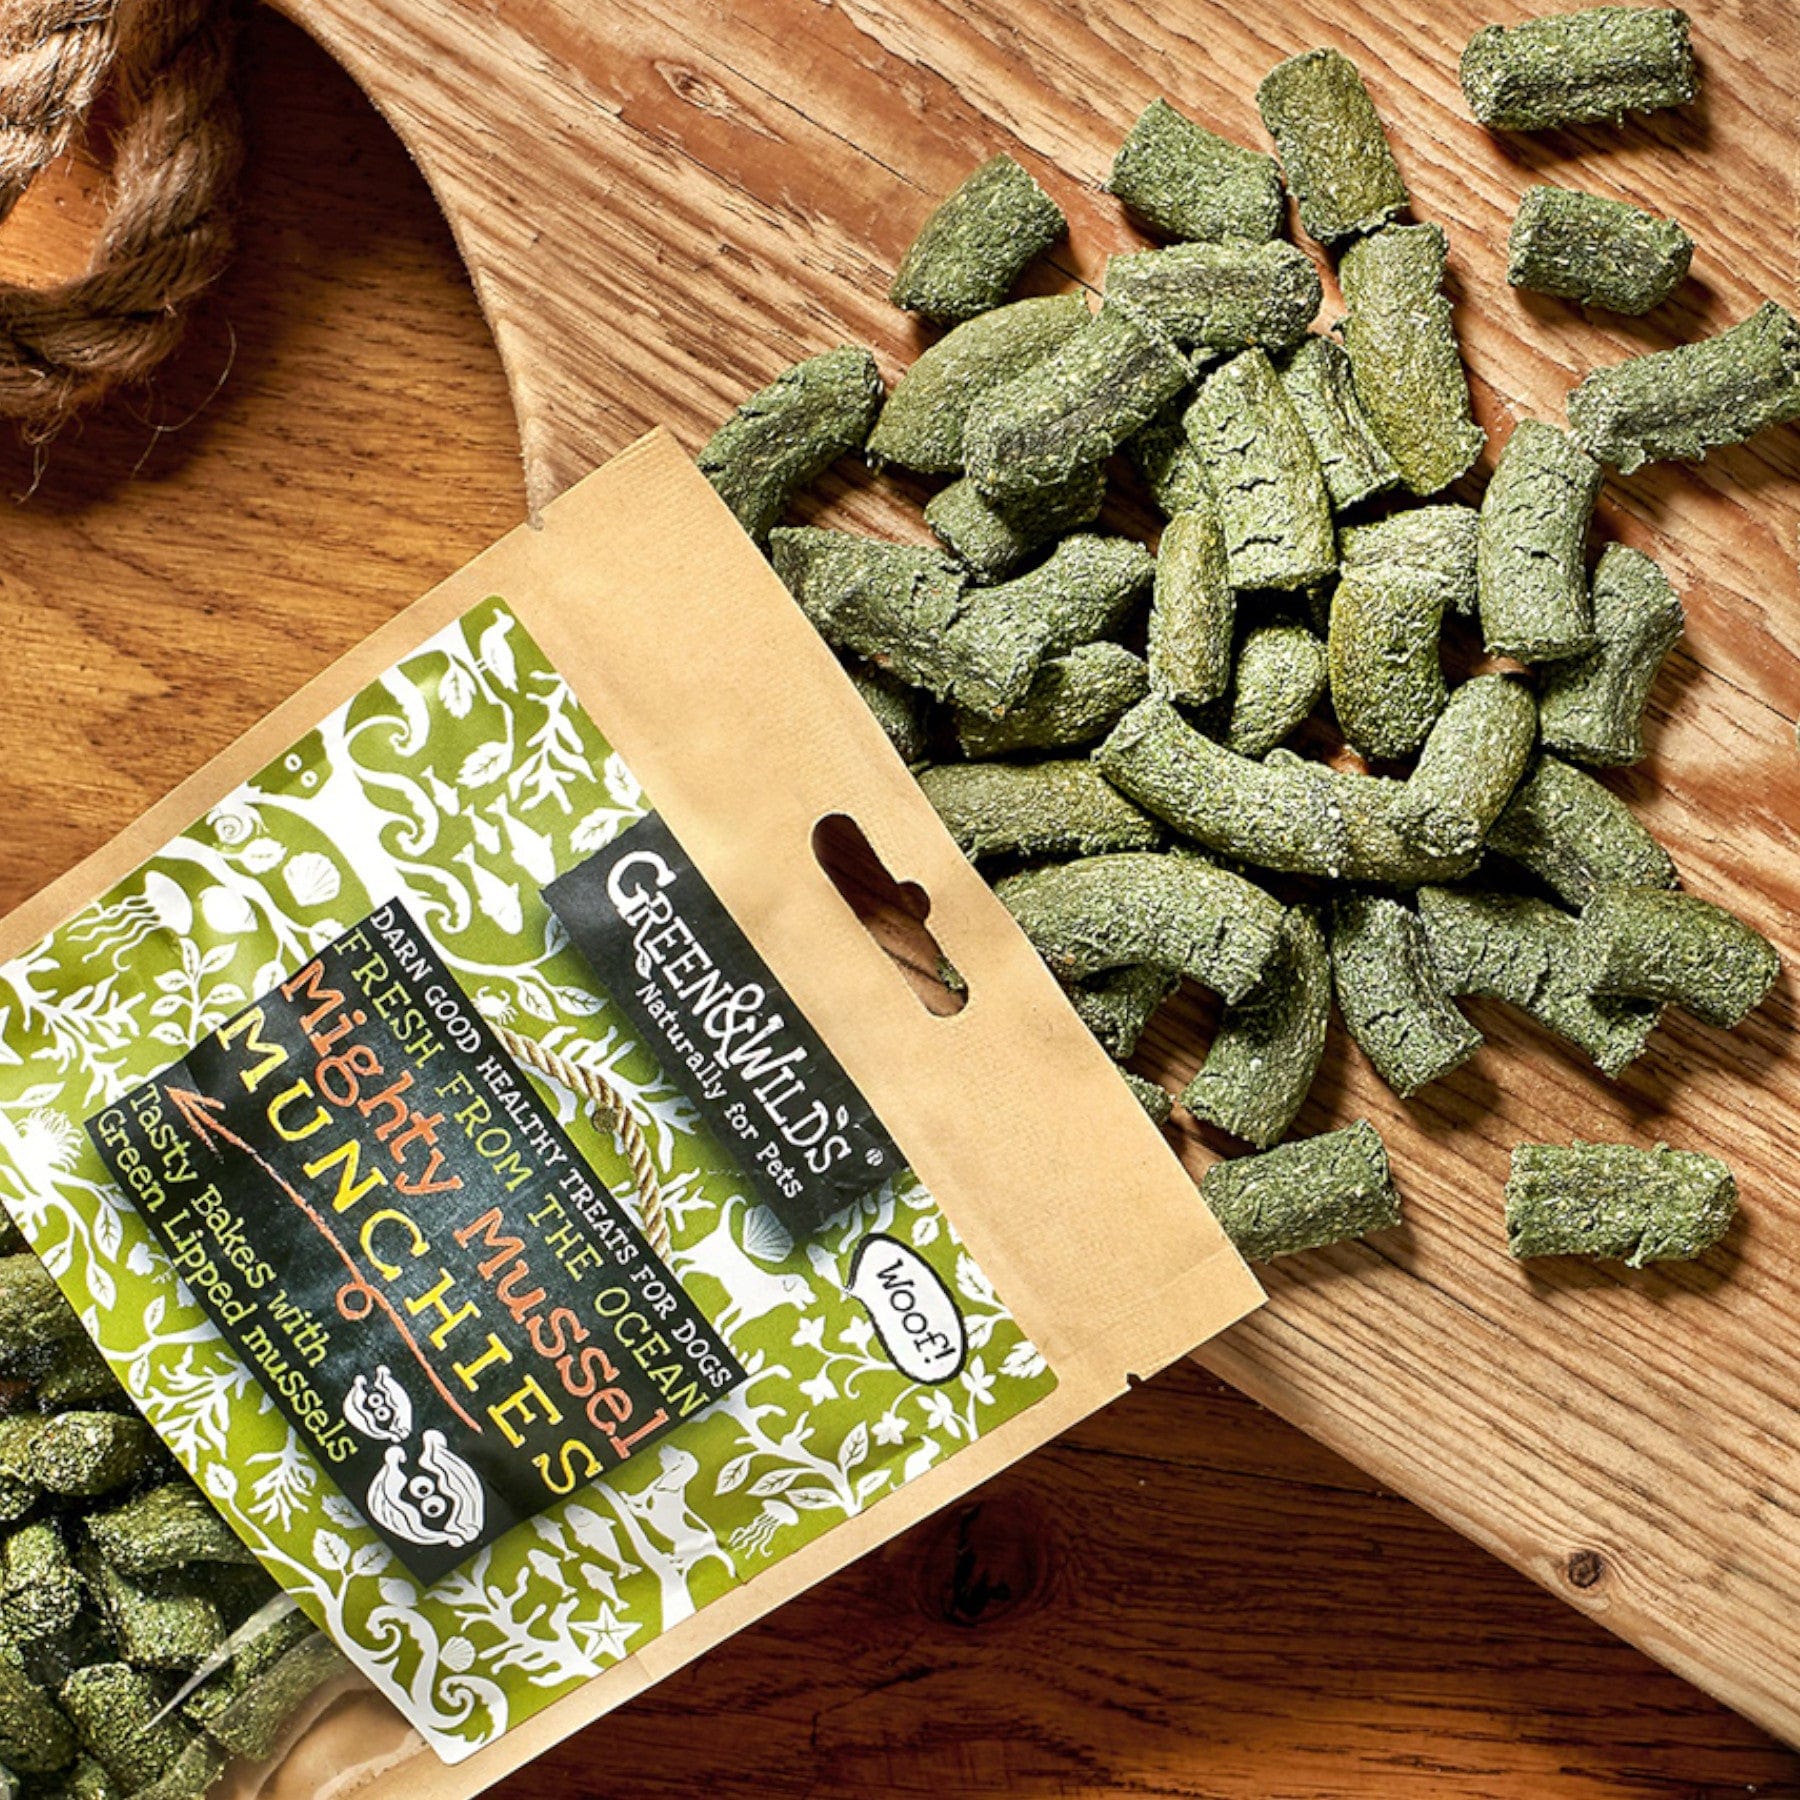 Organic pet food Greenhill's Mighty Munchies with fresh farm-grown mushrooms, peas and parsley on wooden background, eco-friendly packaging, vegan dog treats spilled from bag.